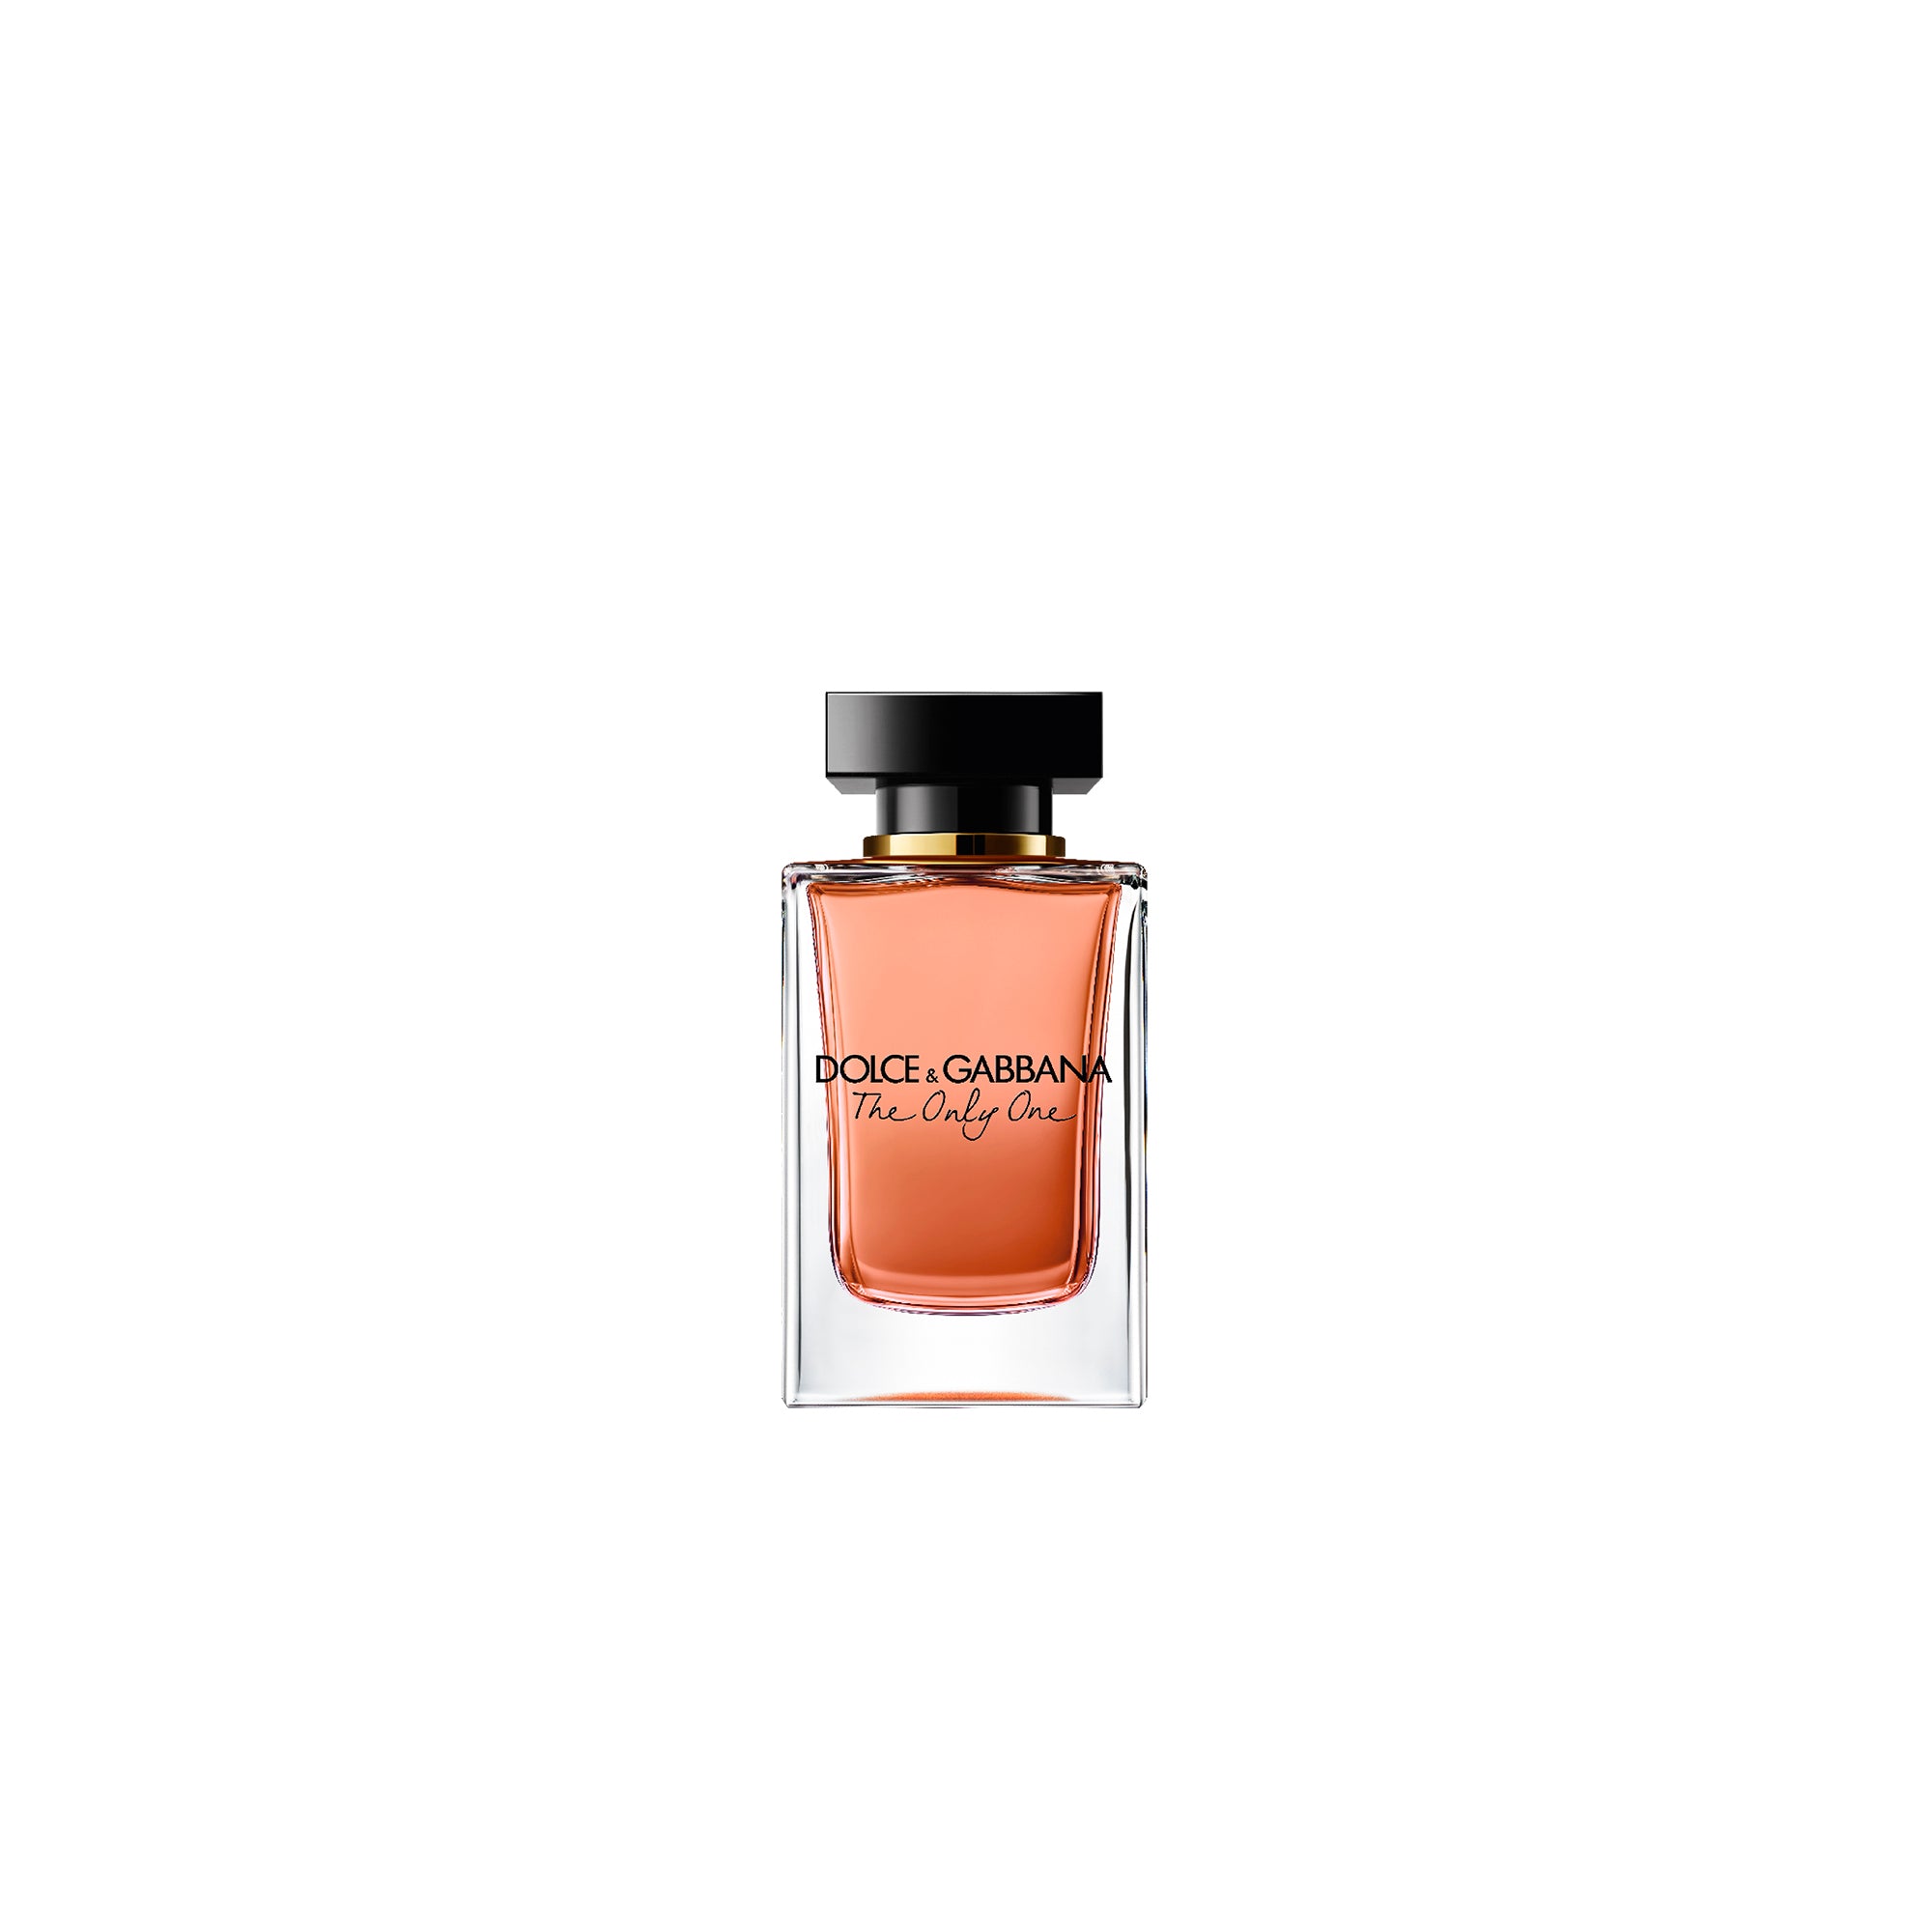 DOLCE & GABBANA The Only One EDP 100ml